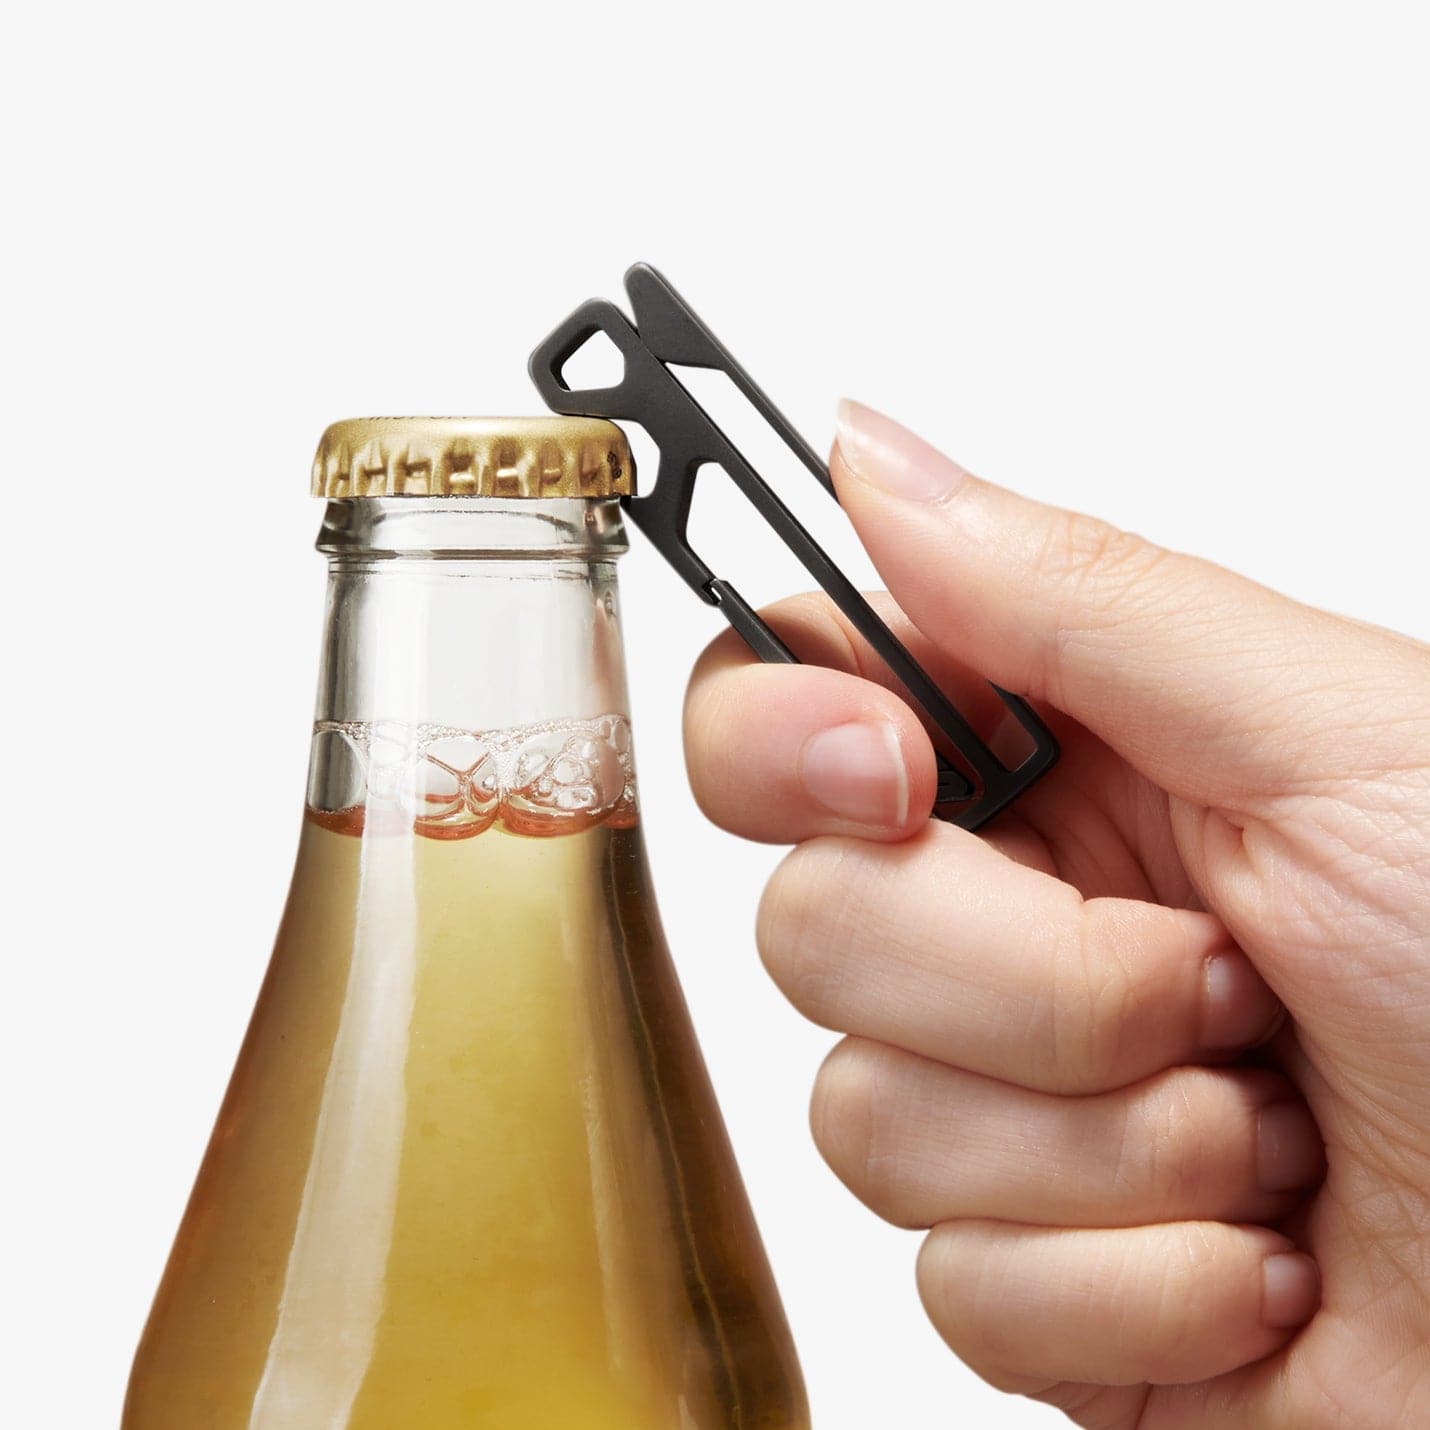 AHP05318 - Key Holder Clip Metal Fit in black showing the clip being used to open a beer bottle